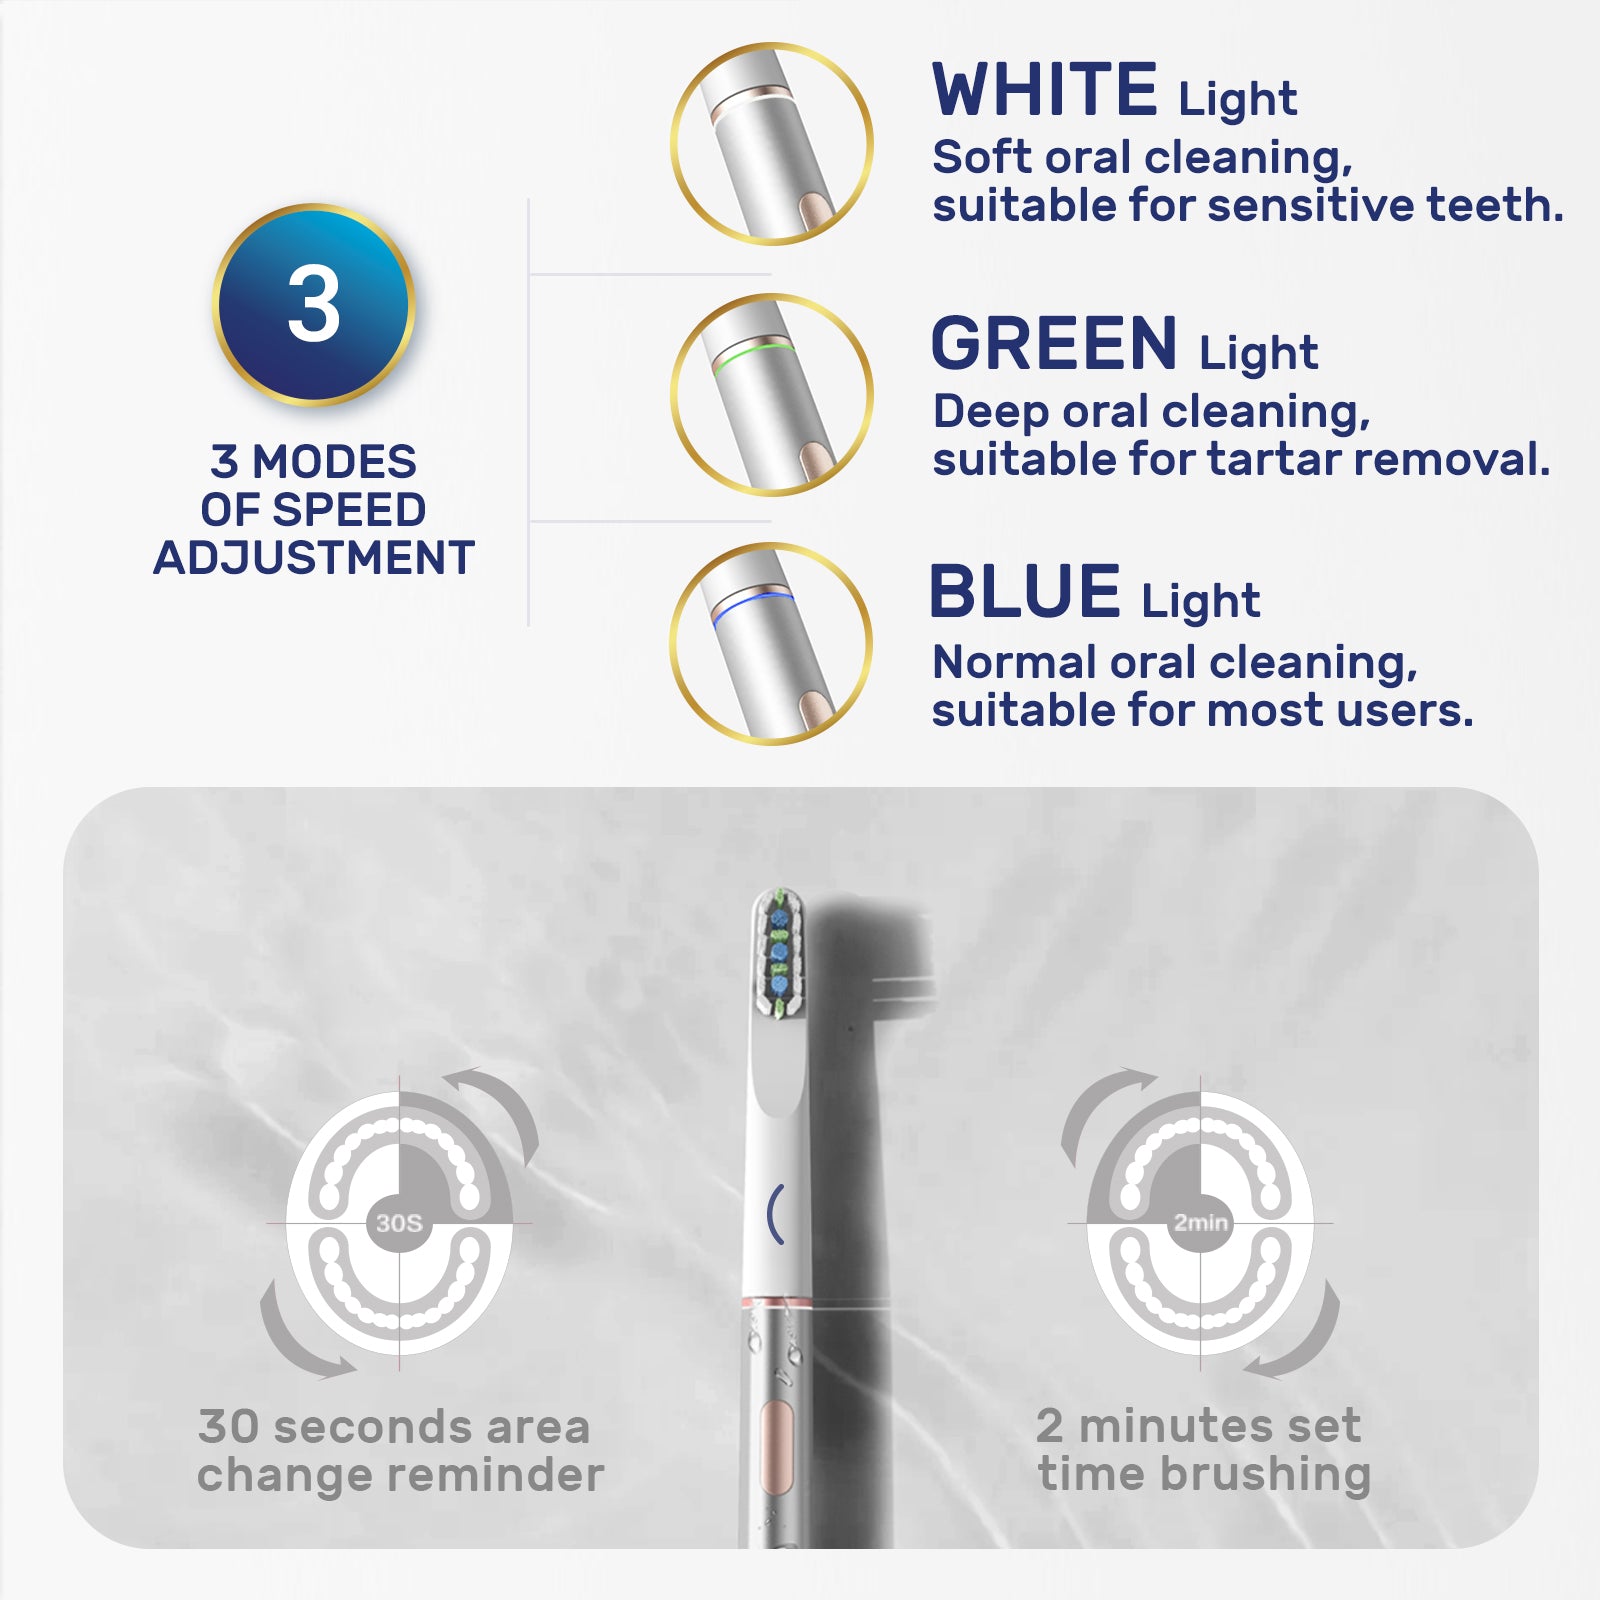 Whitening Laboratory toothbrush with three modes of speed adjustment for various cleaning needs, including a 30-second area change reminder.